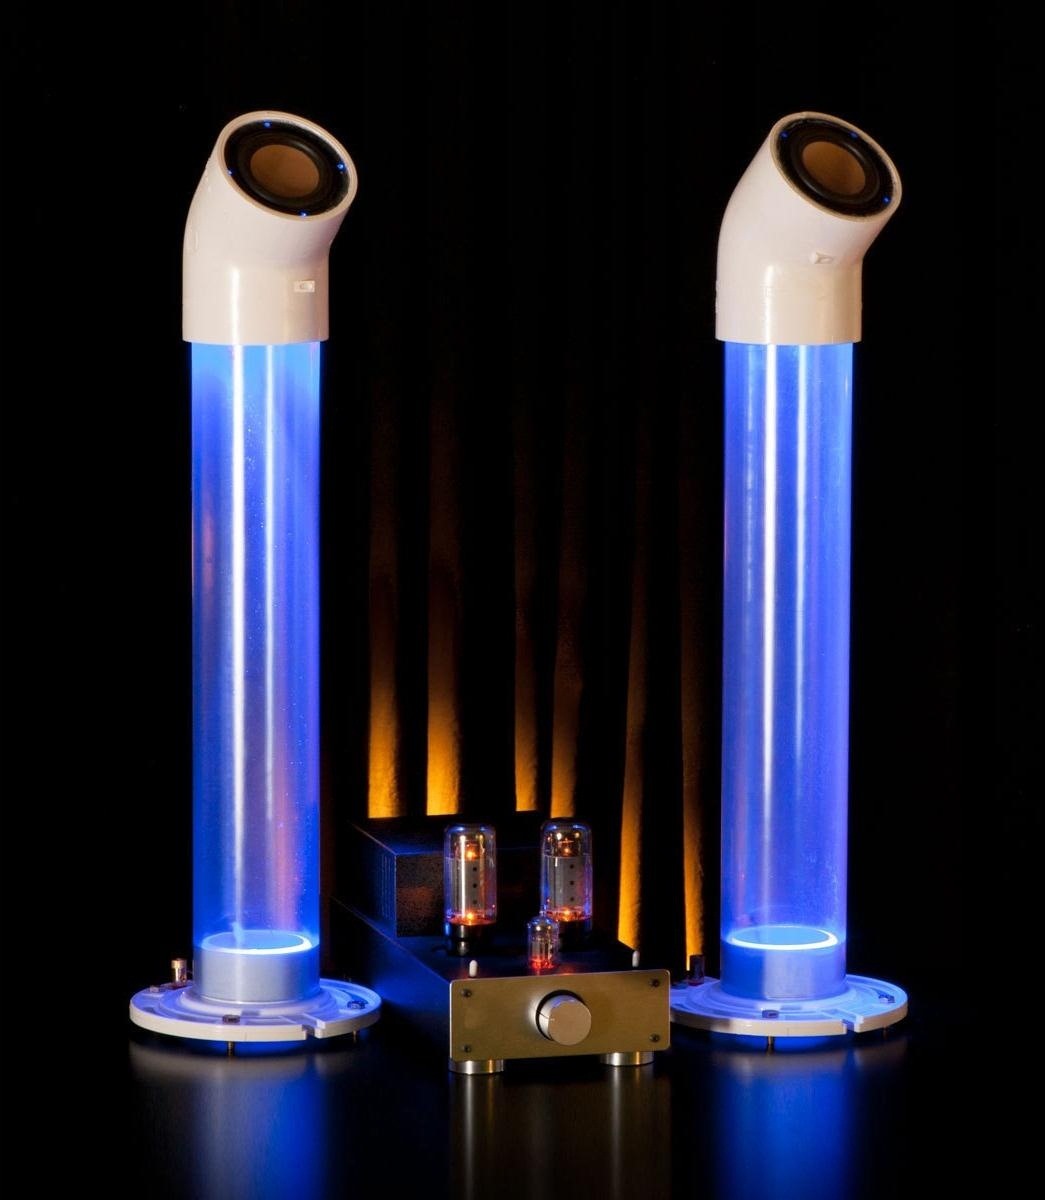 DIY Pulsating Light Rod Speakers That Dance to Your Music